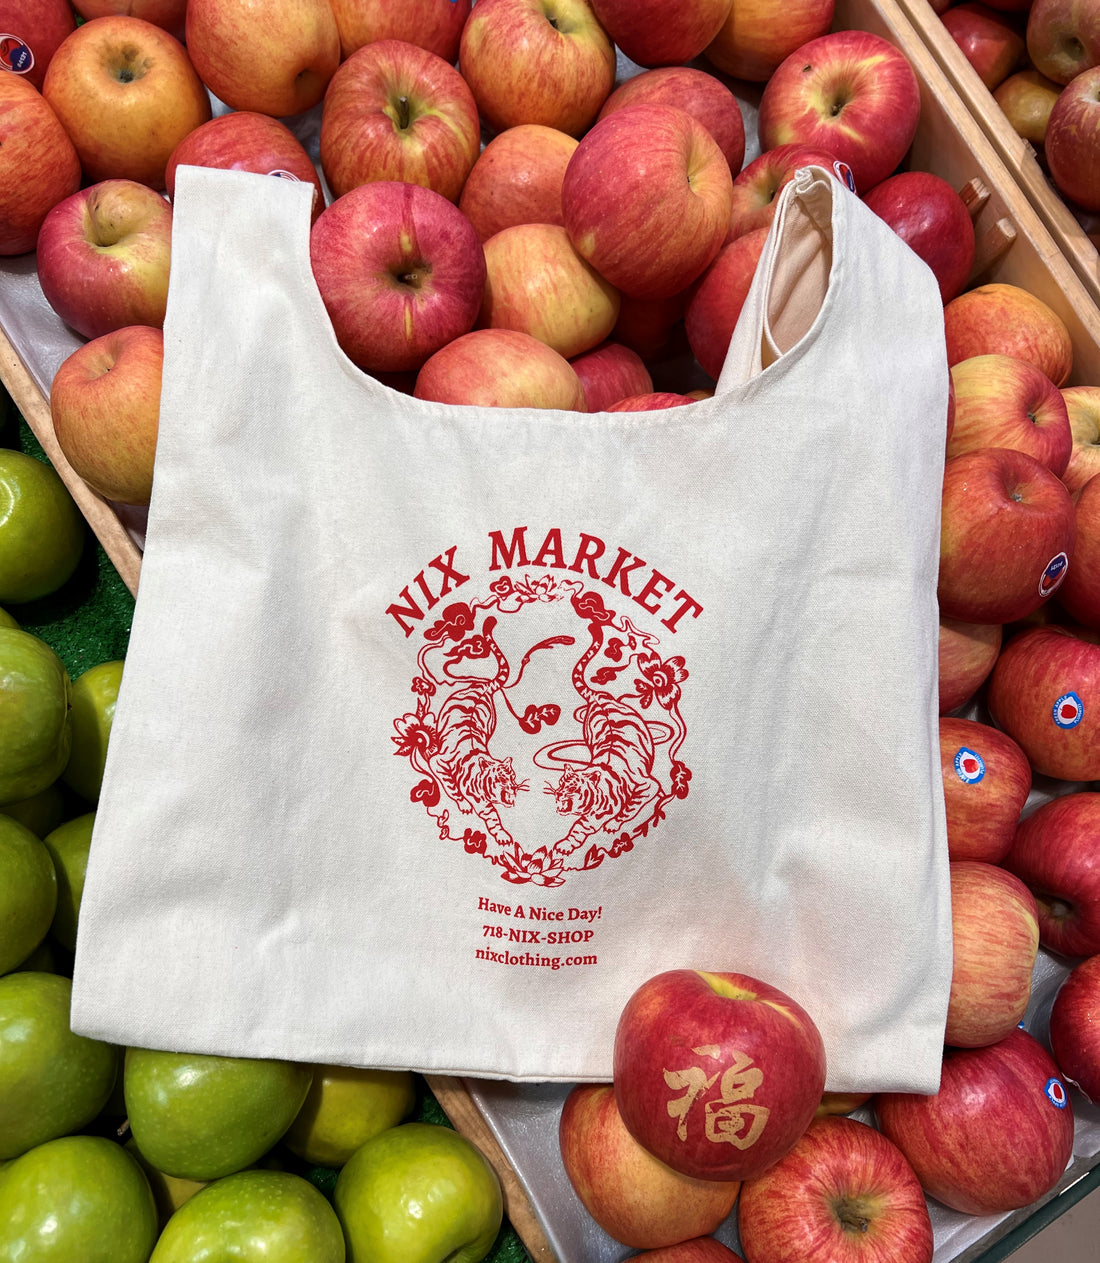 why did we design the nix market tote?